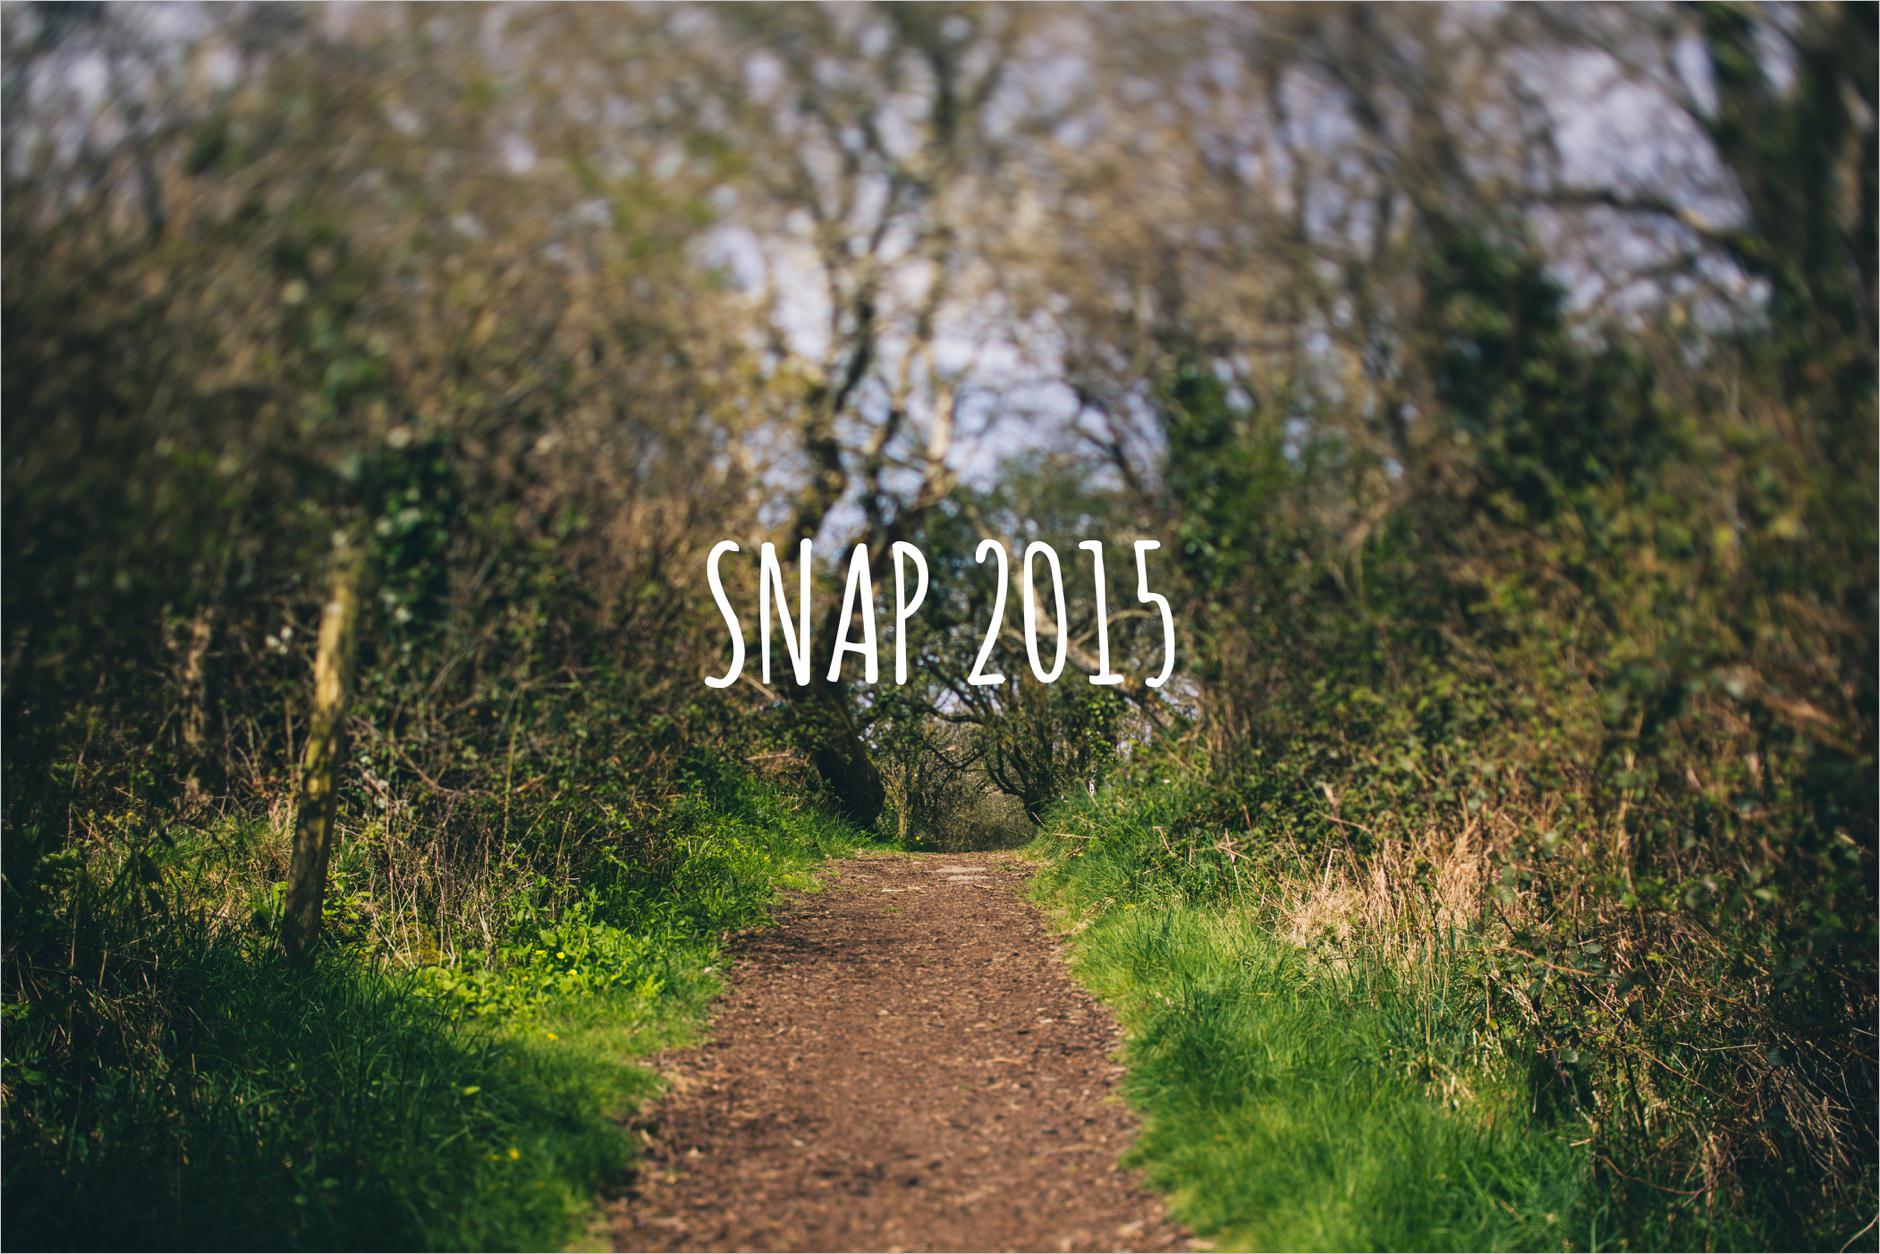 snap photo festival at fforest